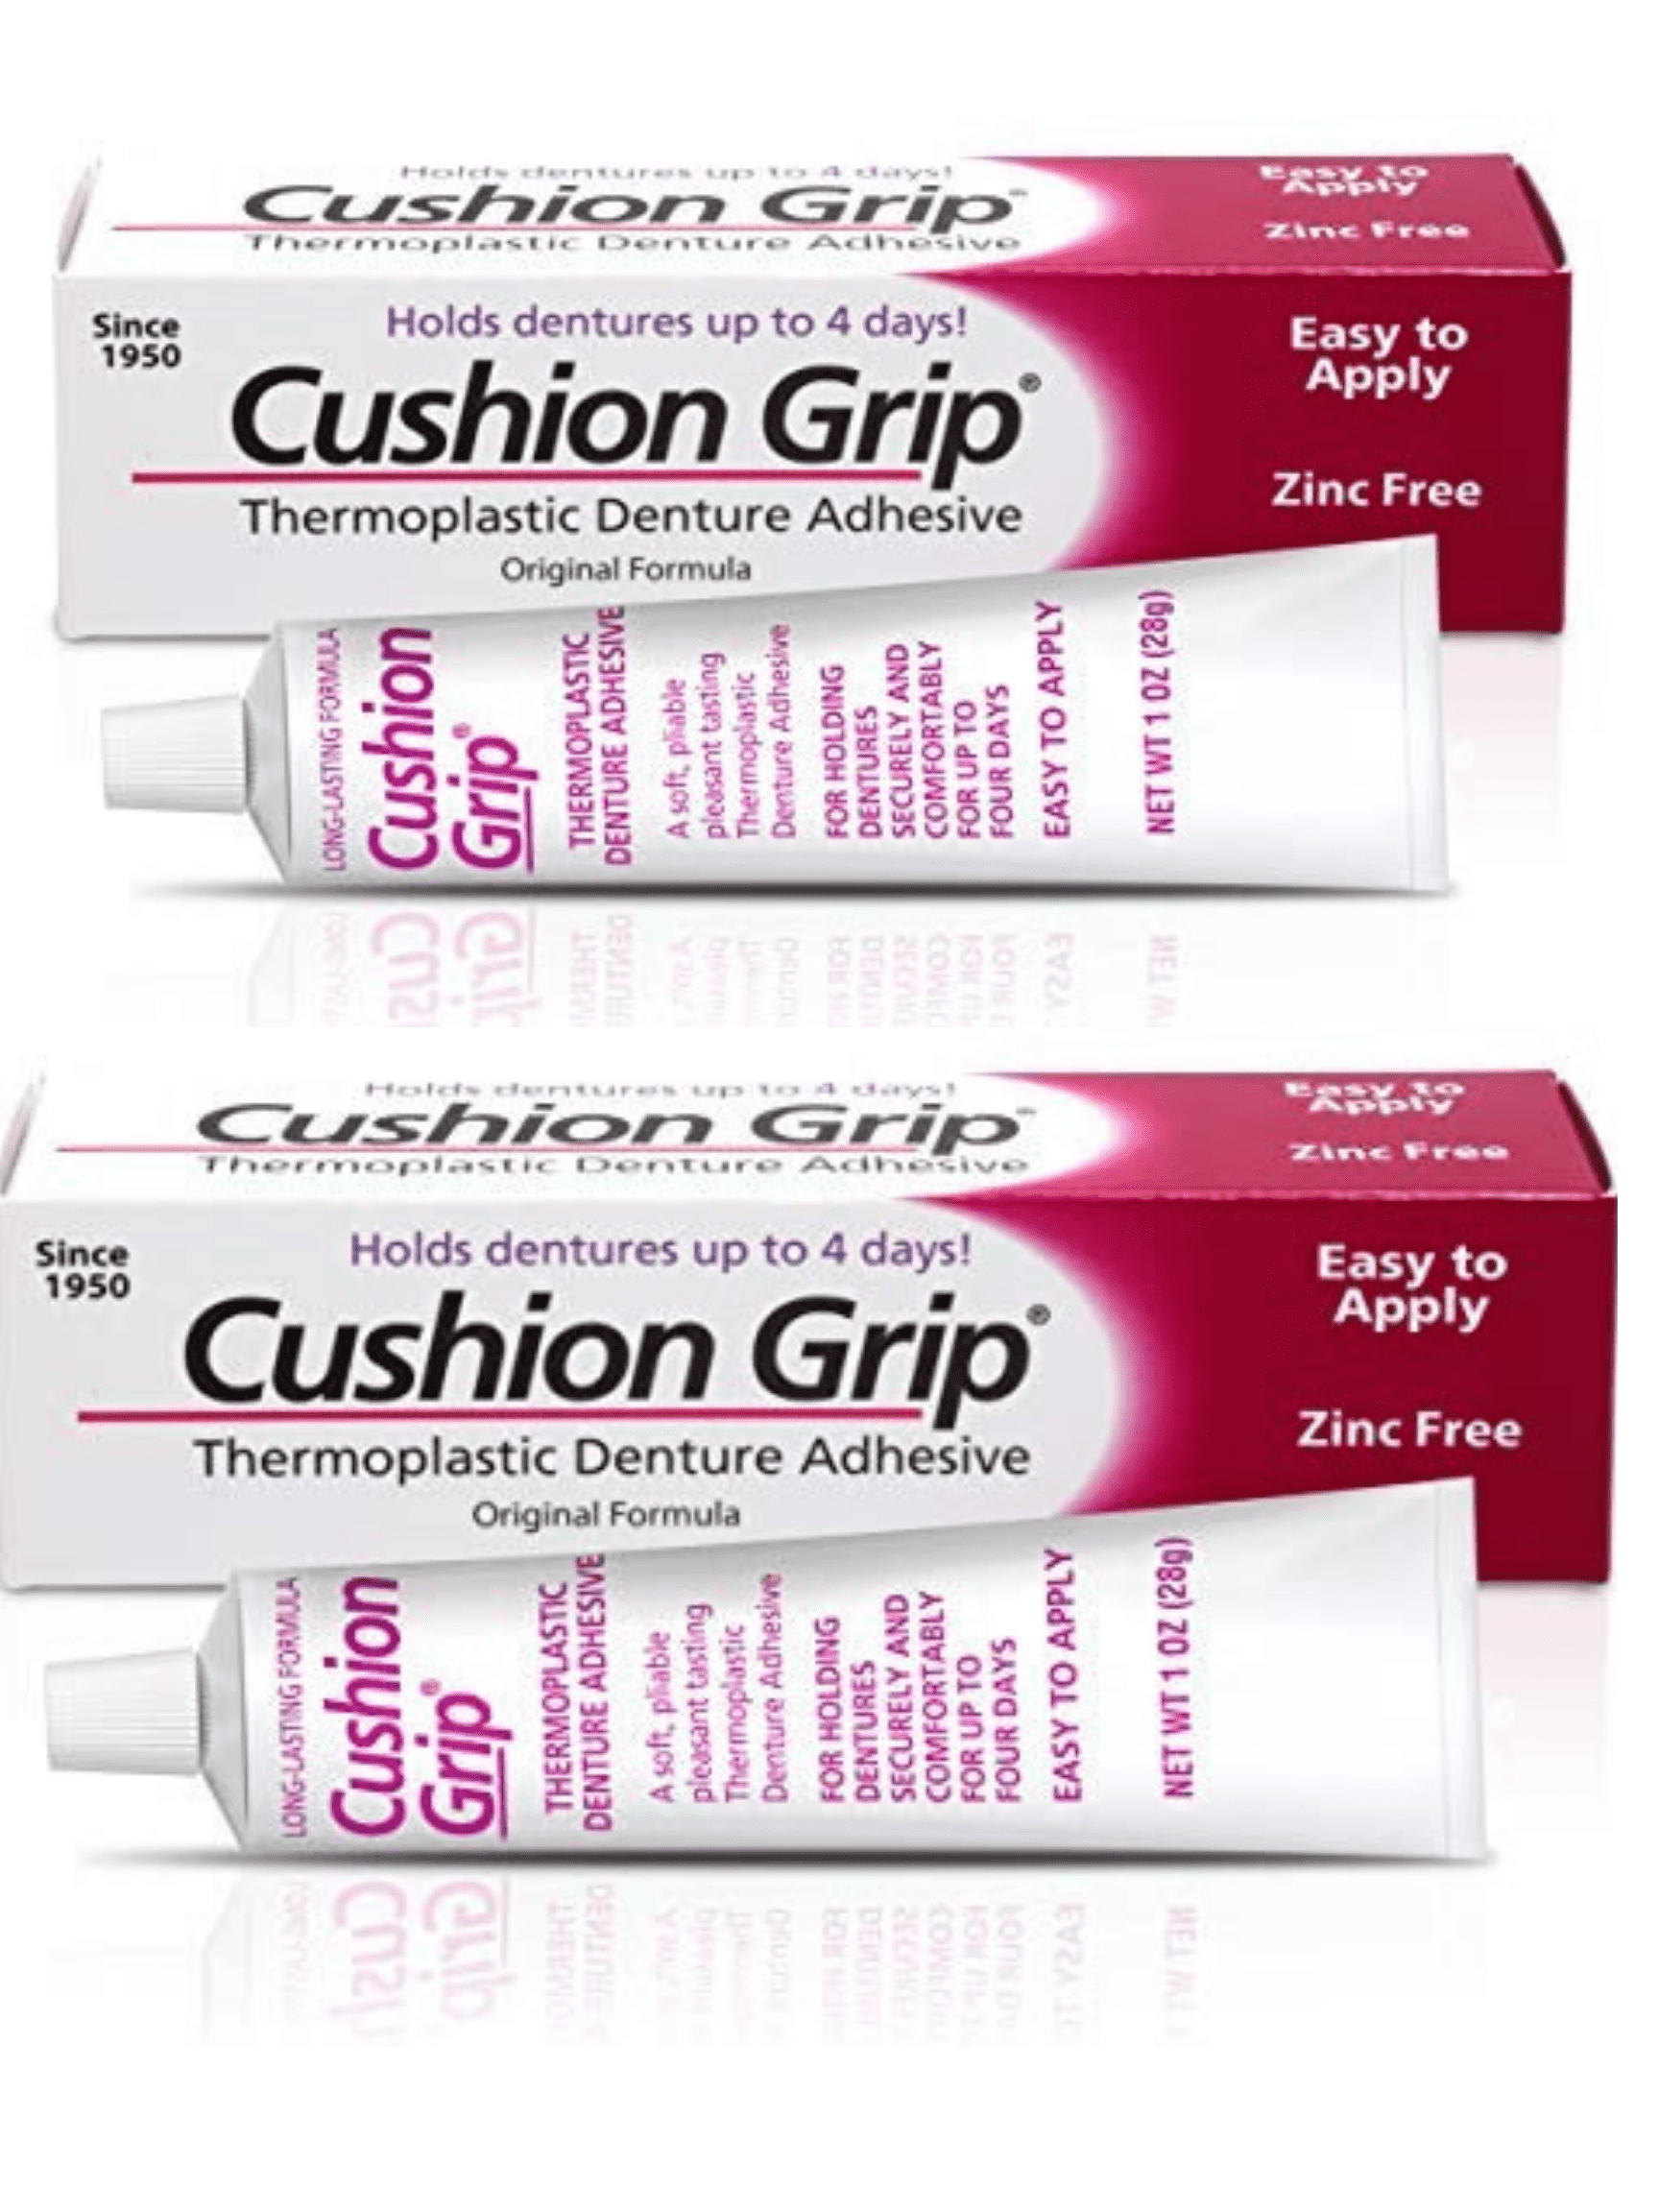 Cushion Grip - a Soft Pliable Thermoplastic for Refitting and Tightening  Dentures 1 Oz (28 Grams)